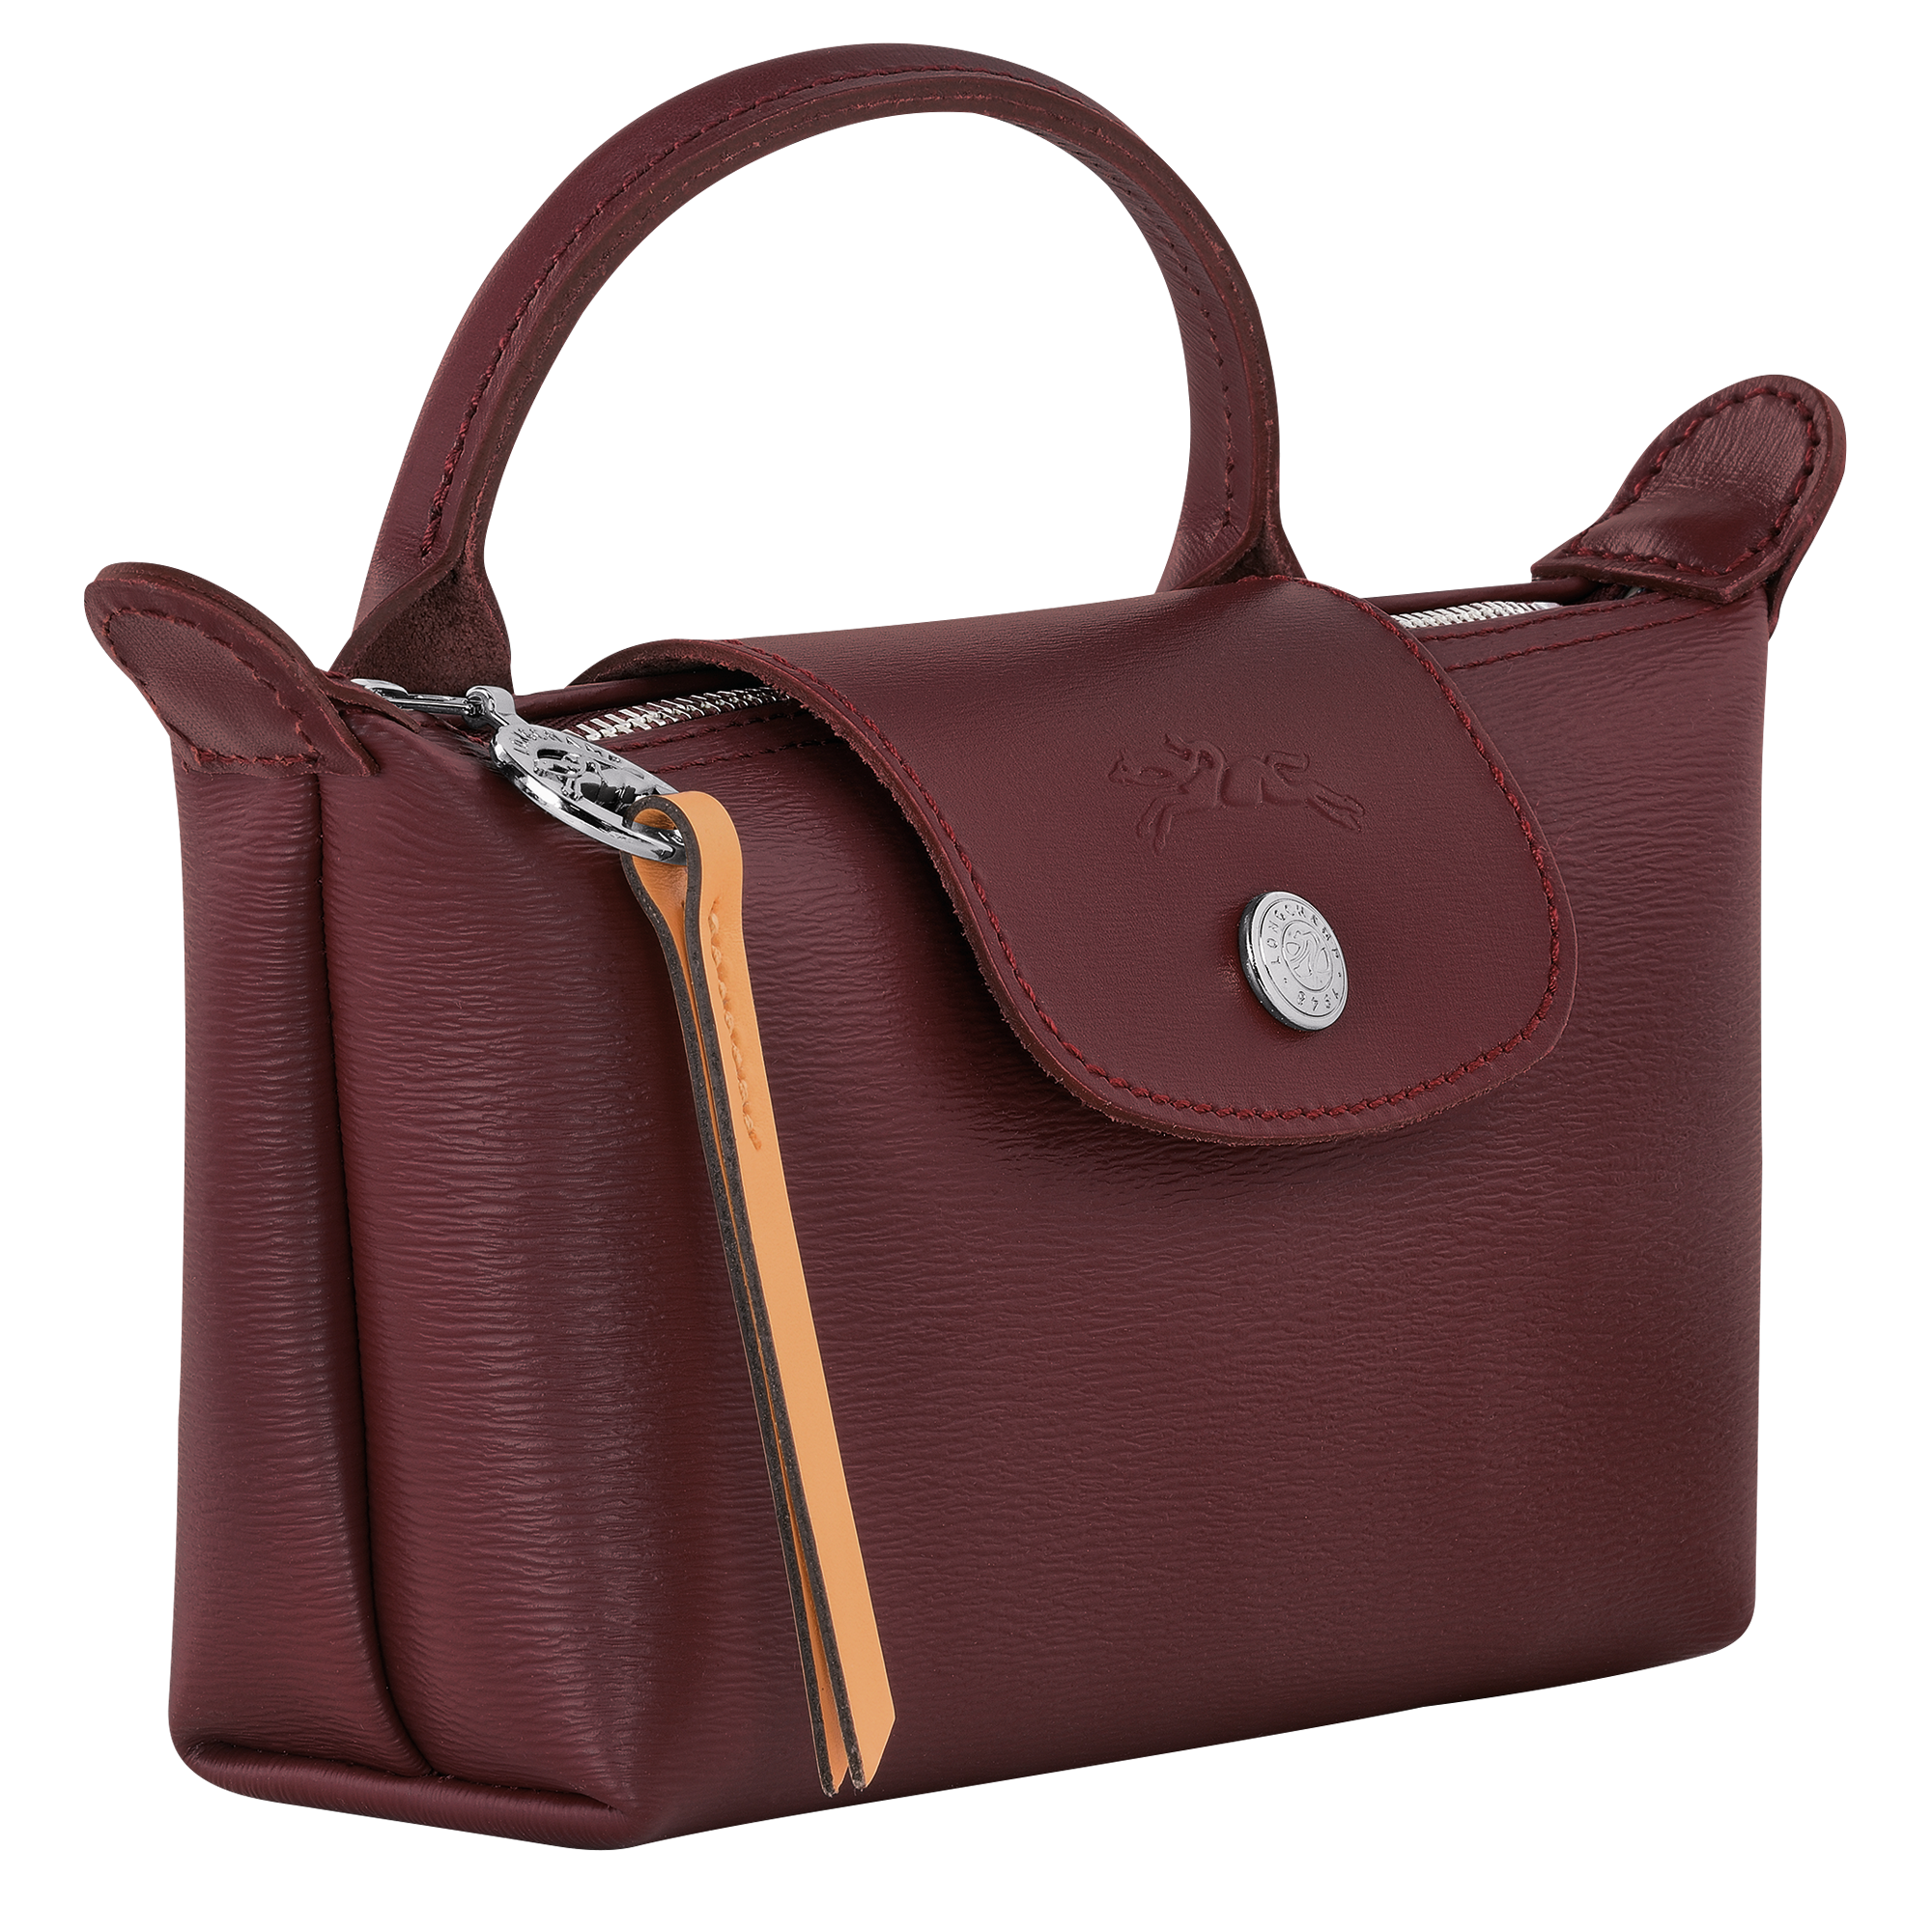 Longchamp LE PLIAGE CITY - Pouch with handle in Plum - 2 (SKU: 34175HYQ261)